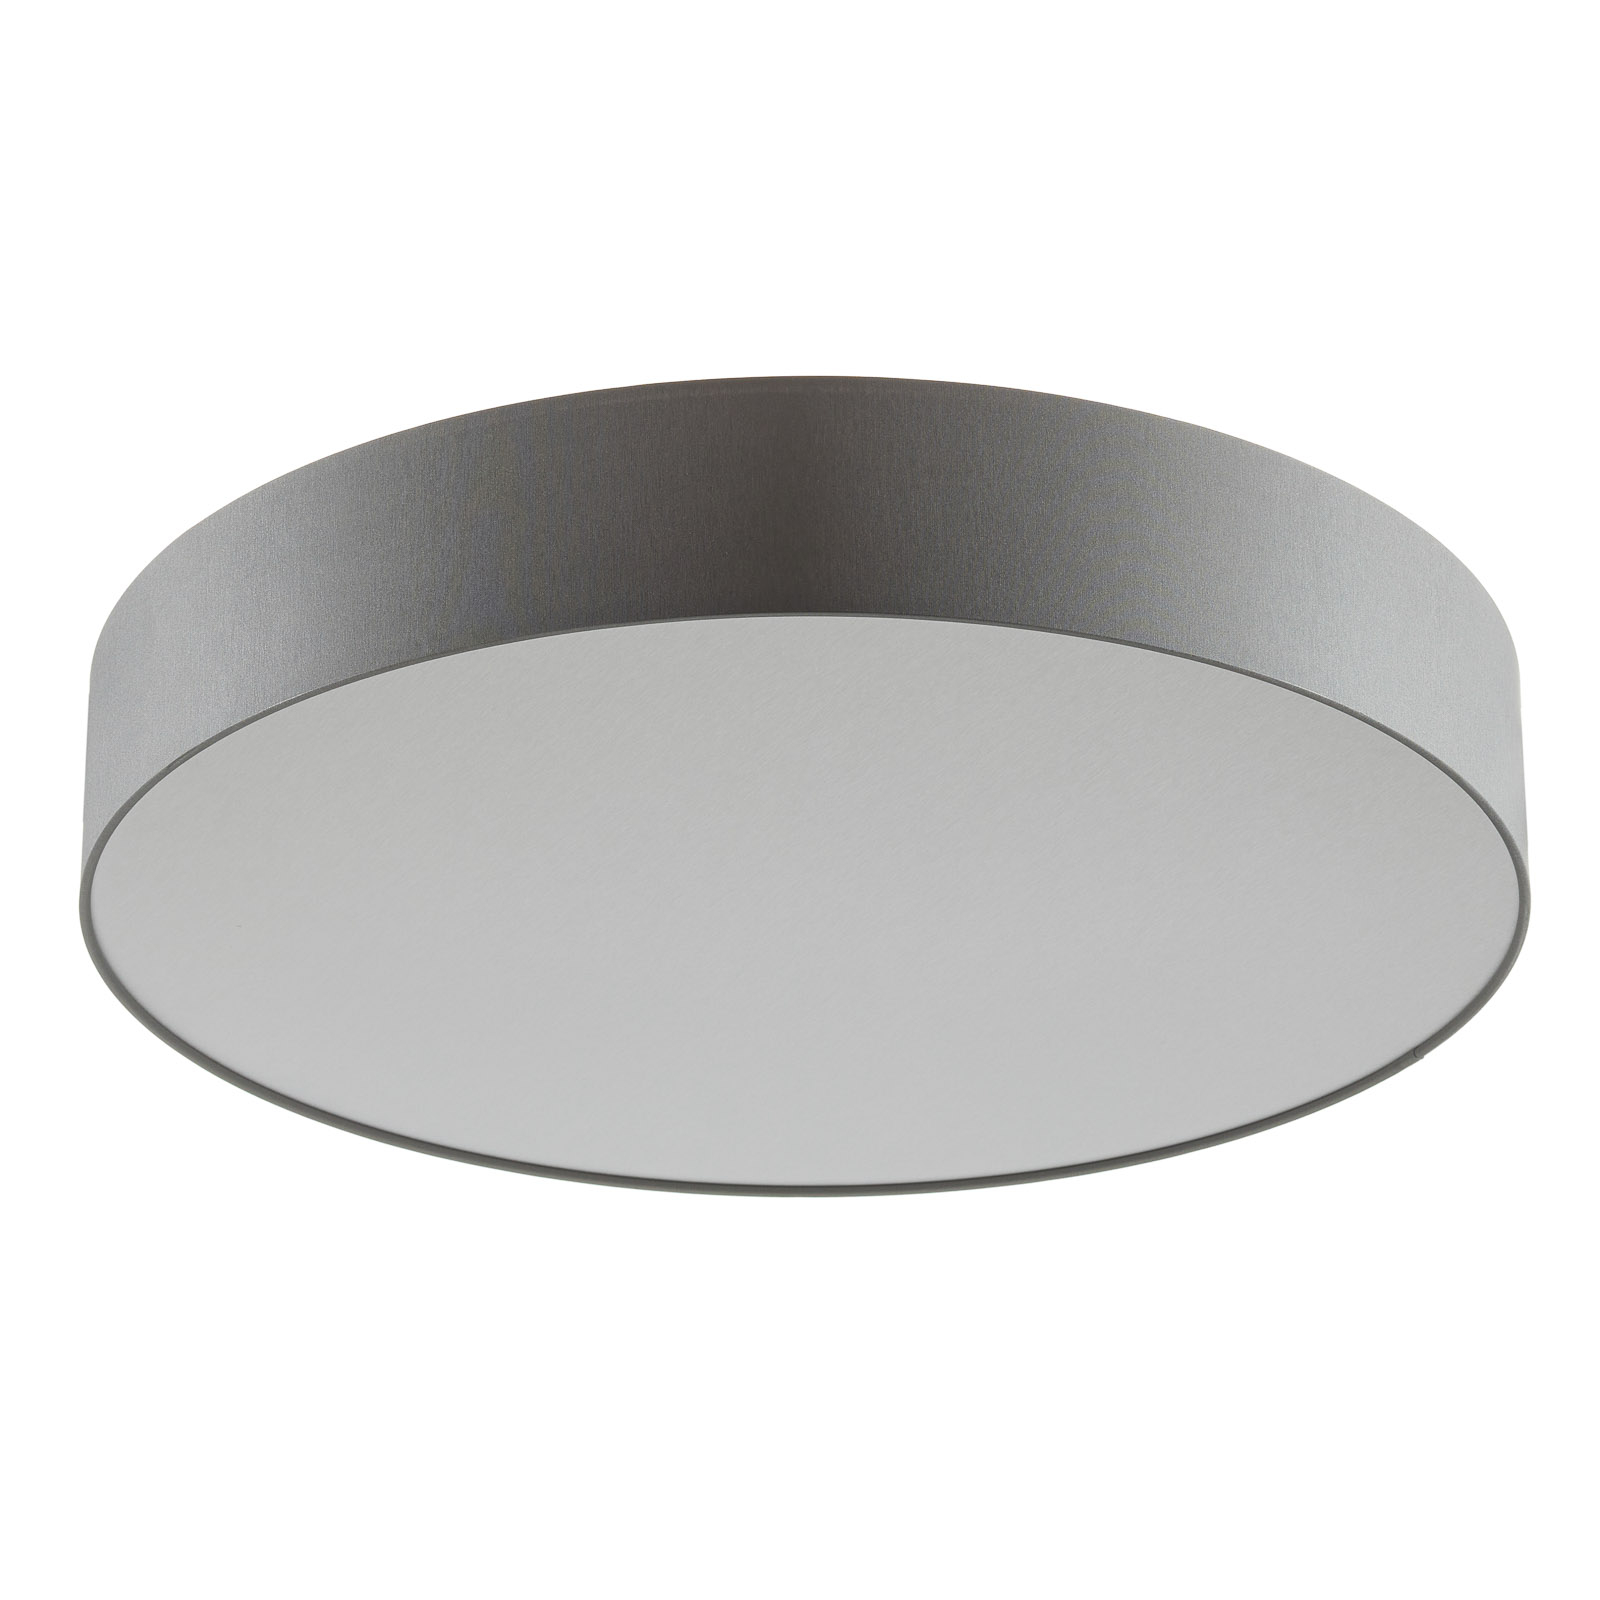 Dimmable Luno LED ceiling light, light grey